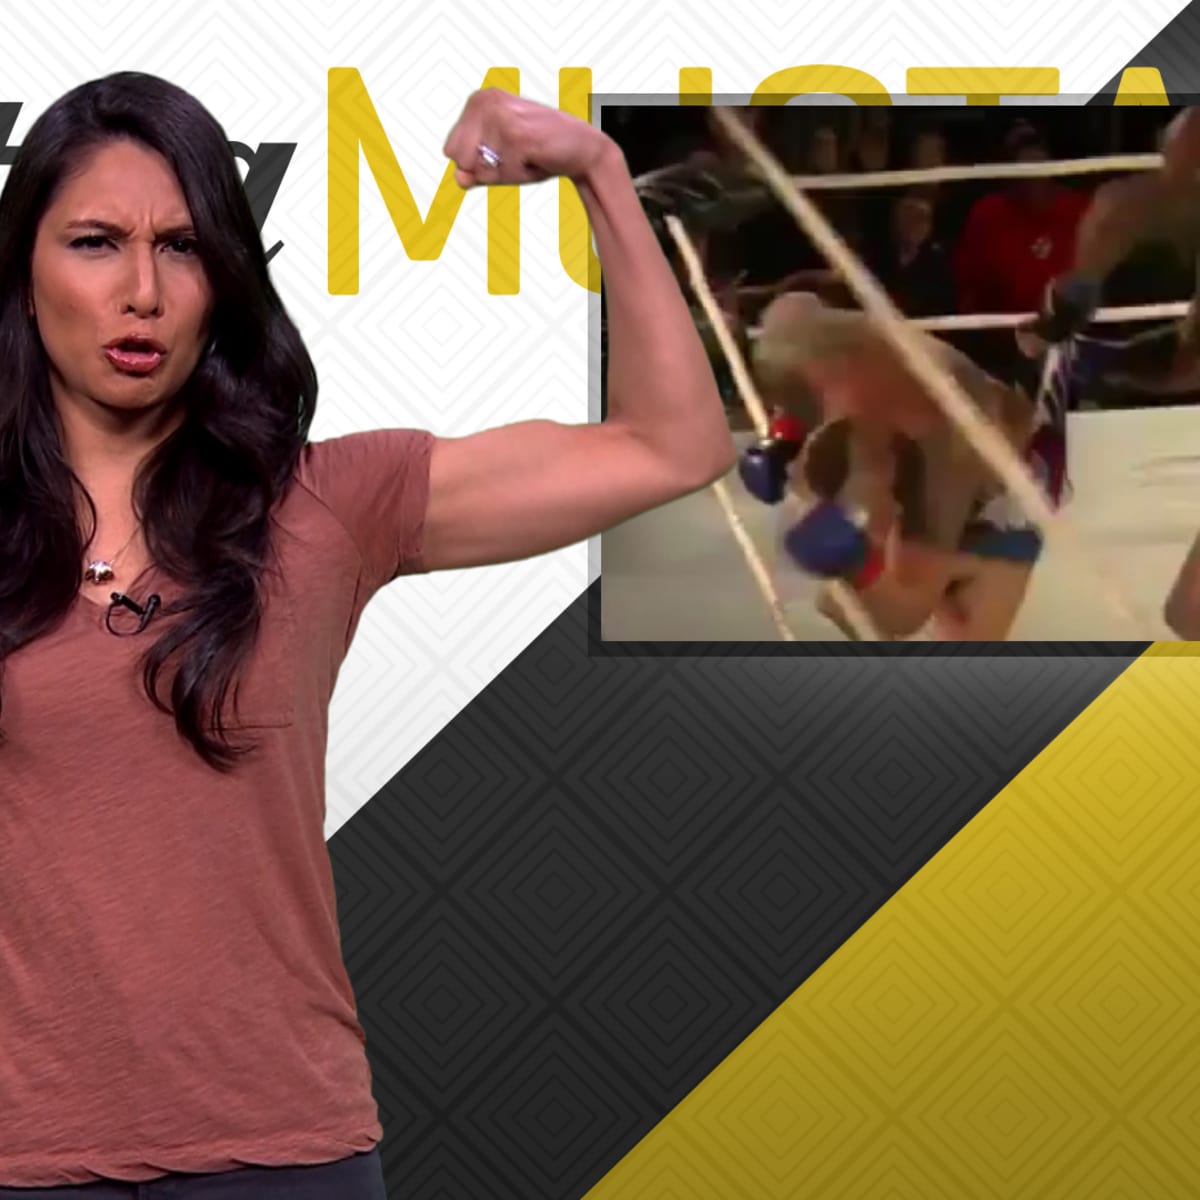 Mustard Minute: No atomic wedgie could stop this fighter from winning match  - Sports Illustrated